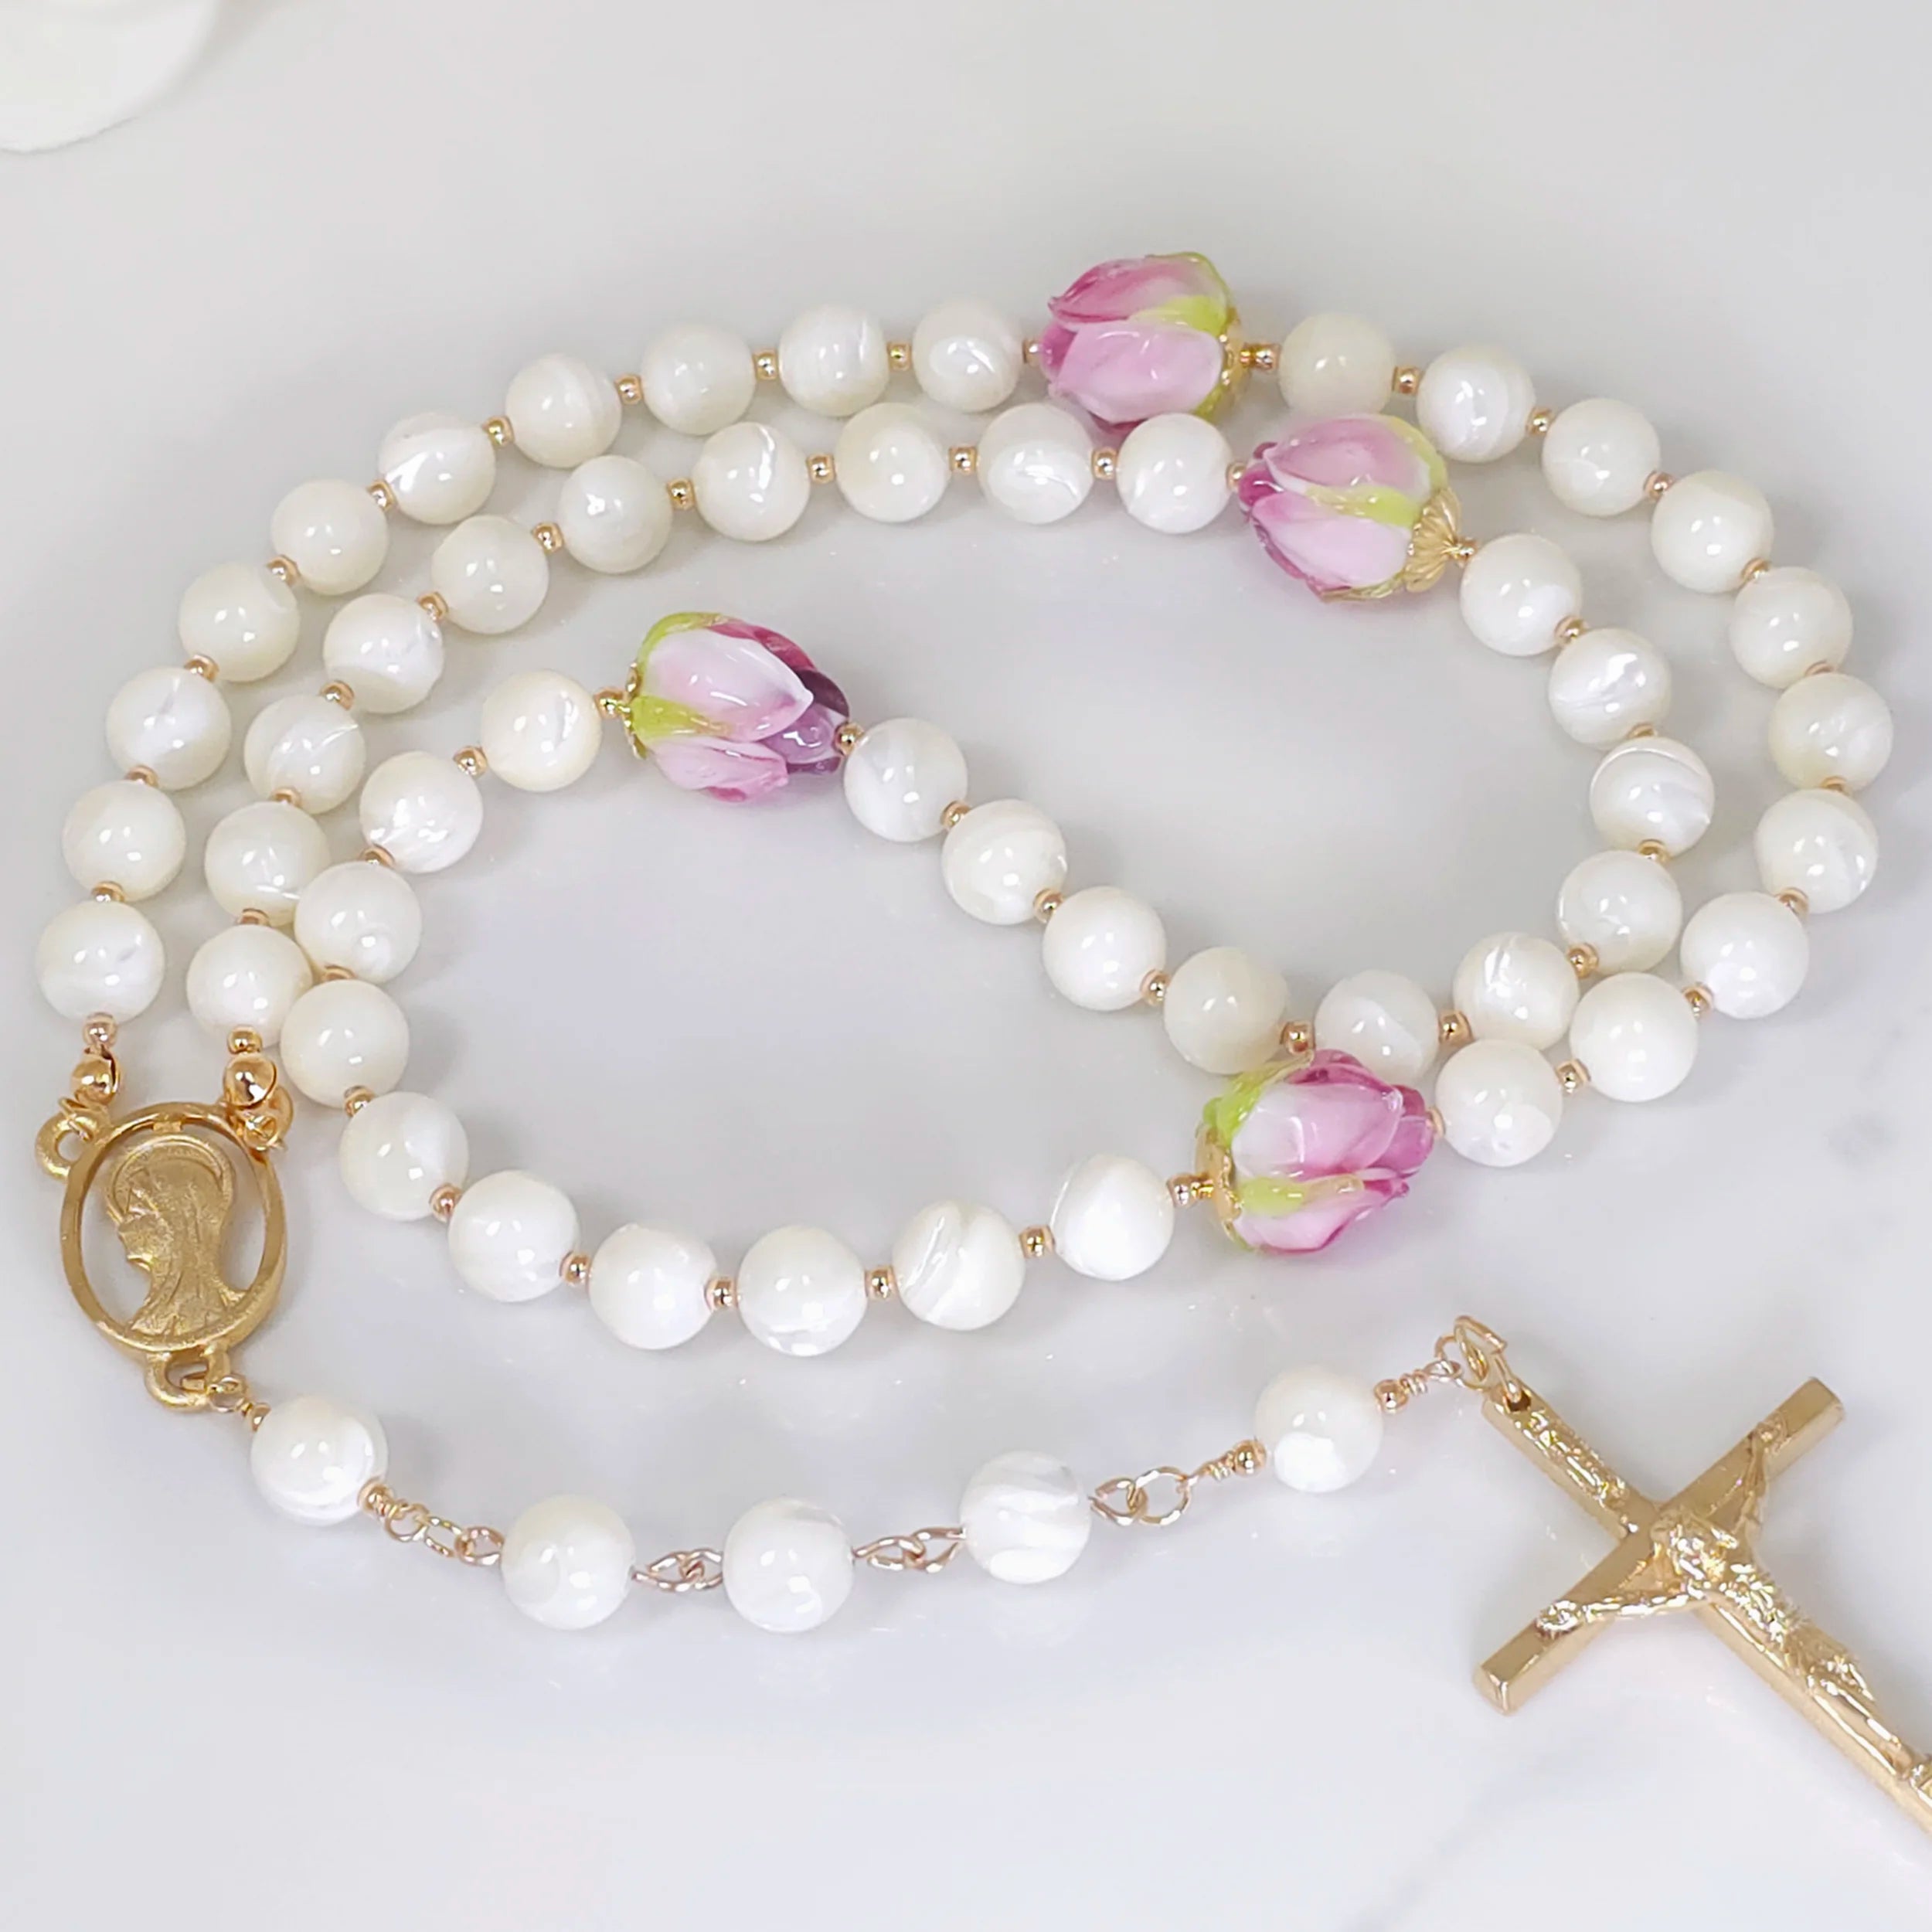 White Mother of Pearl Rose Flower Rosary necklace, gracefully laid out with distinctive beads.